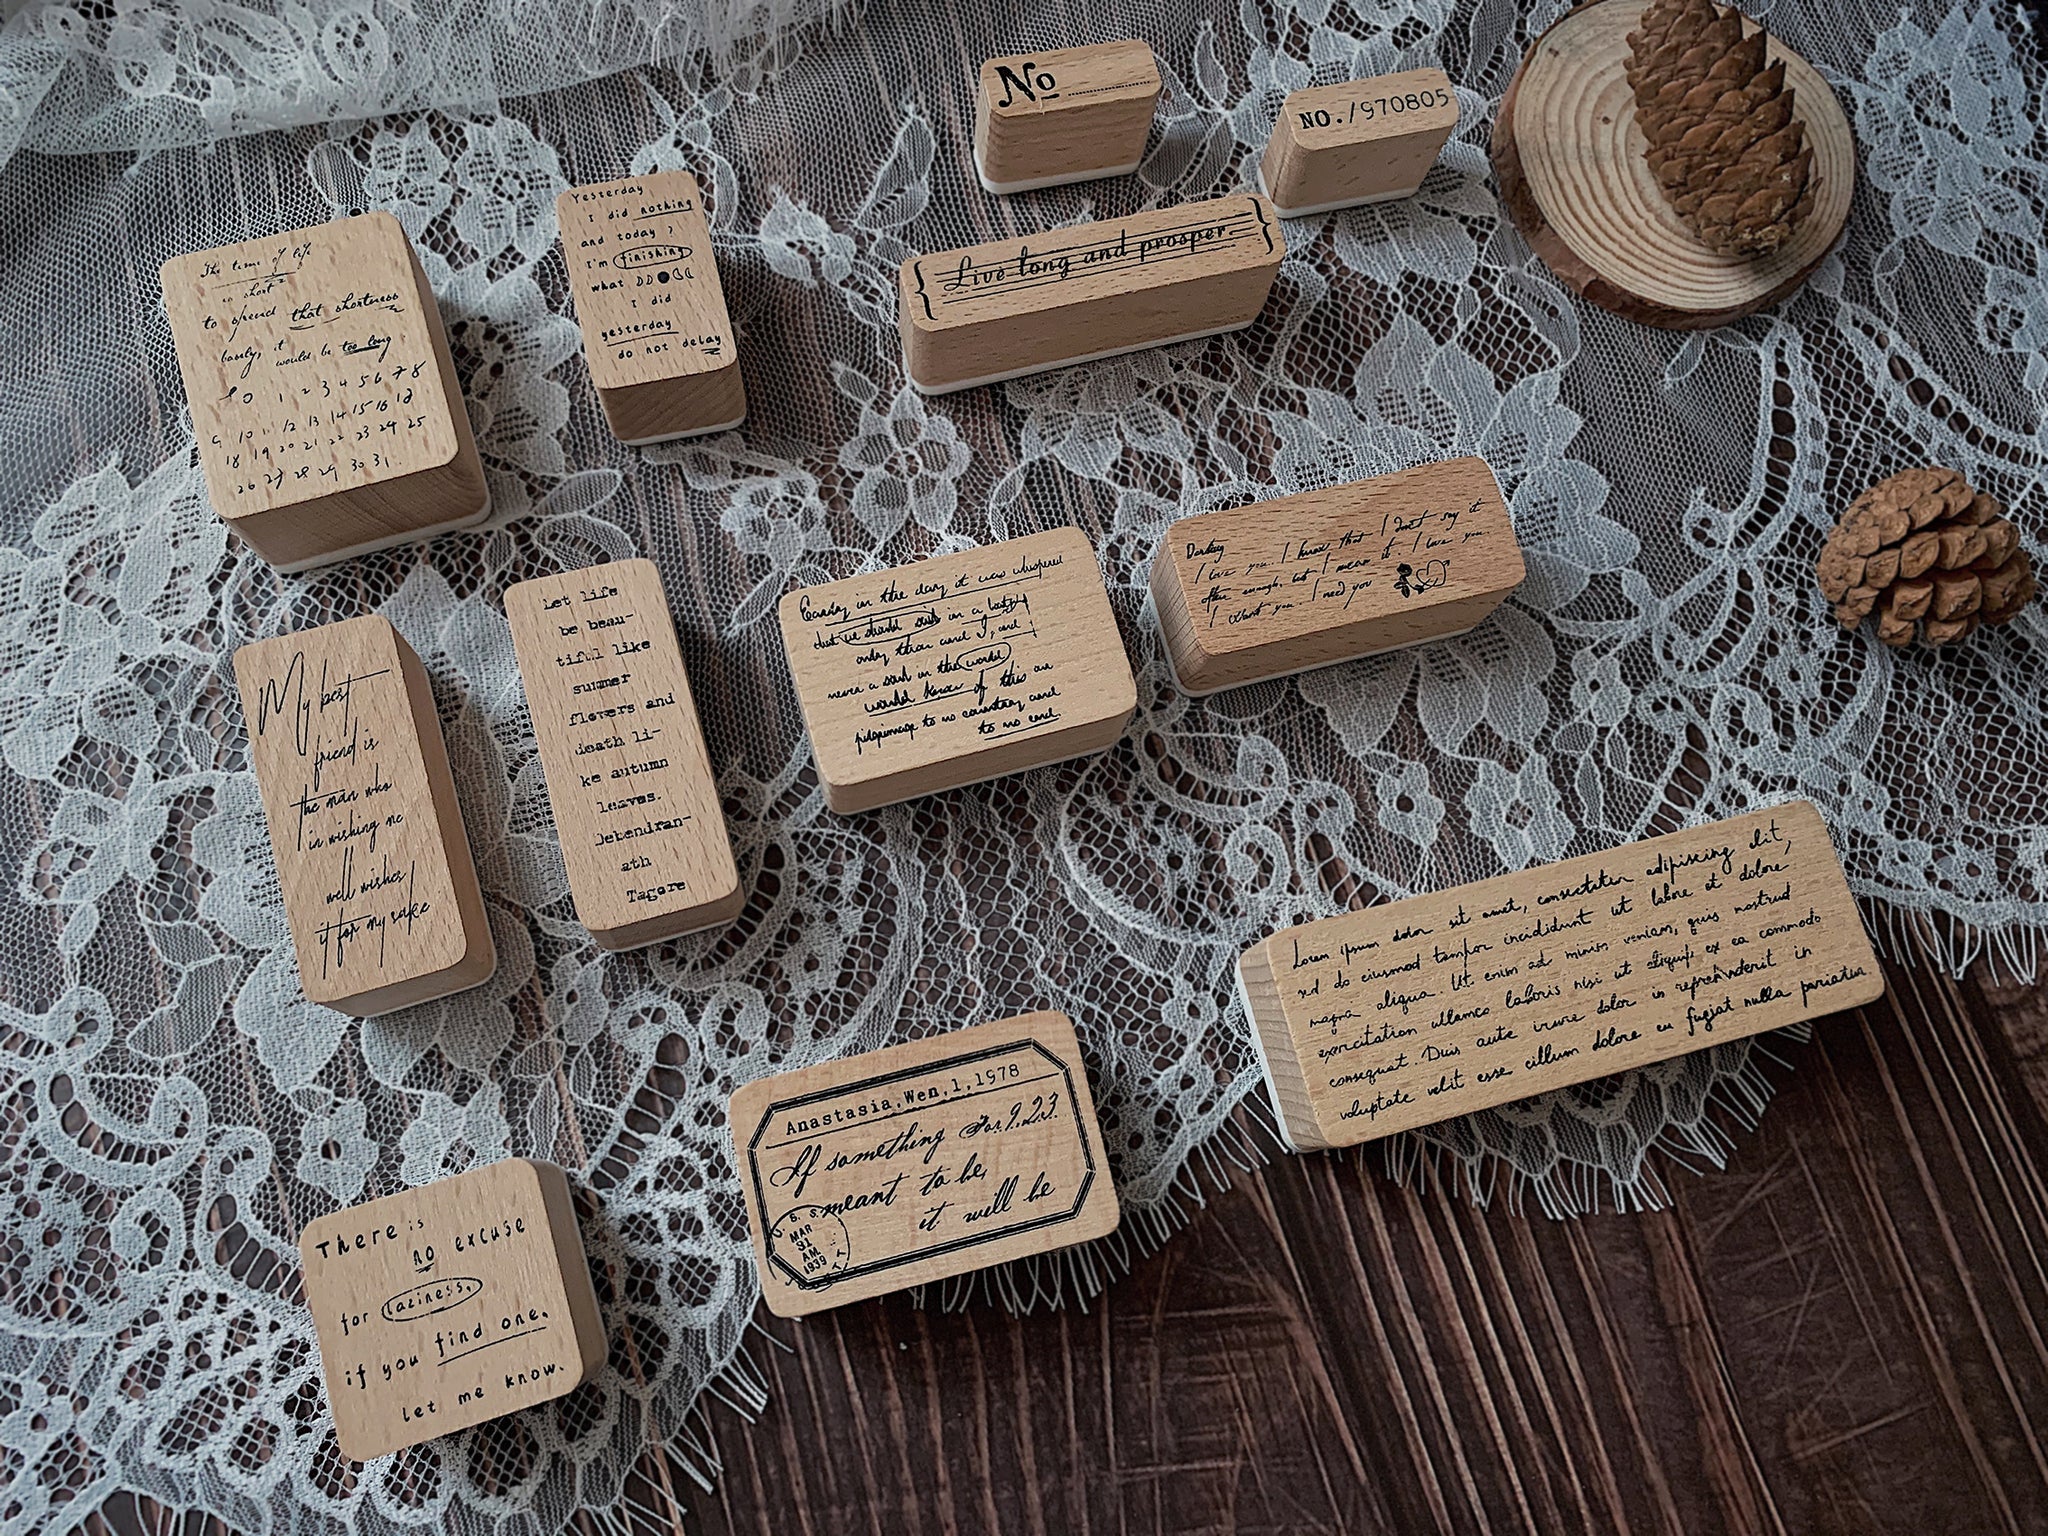 Words and Phrases Rubber Stamps